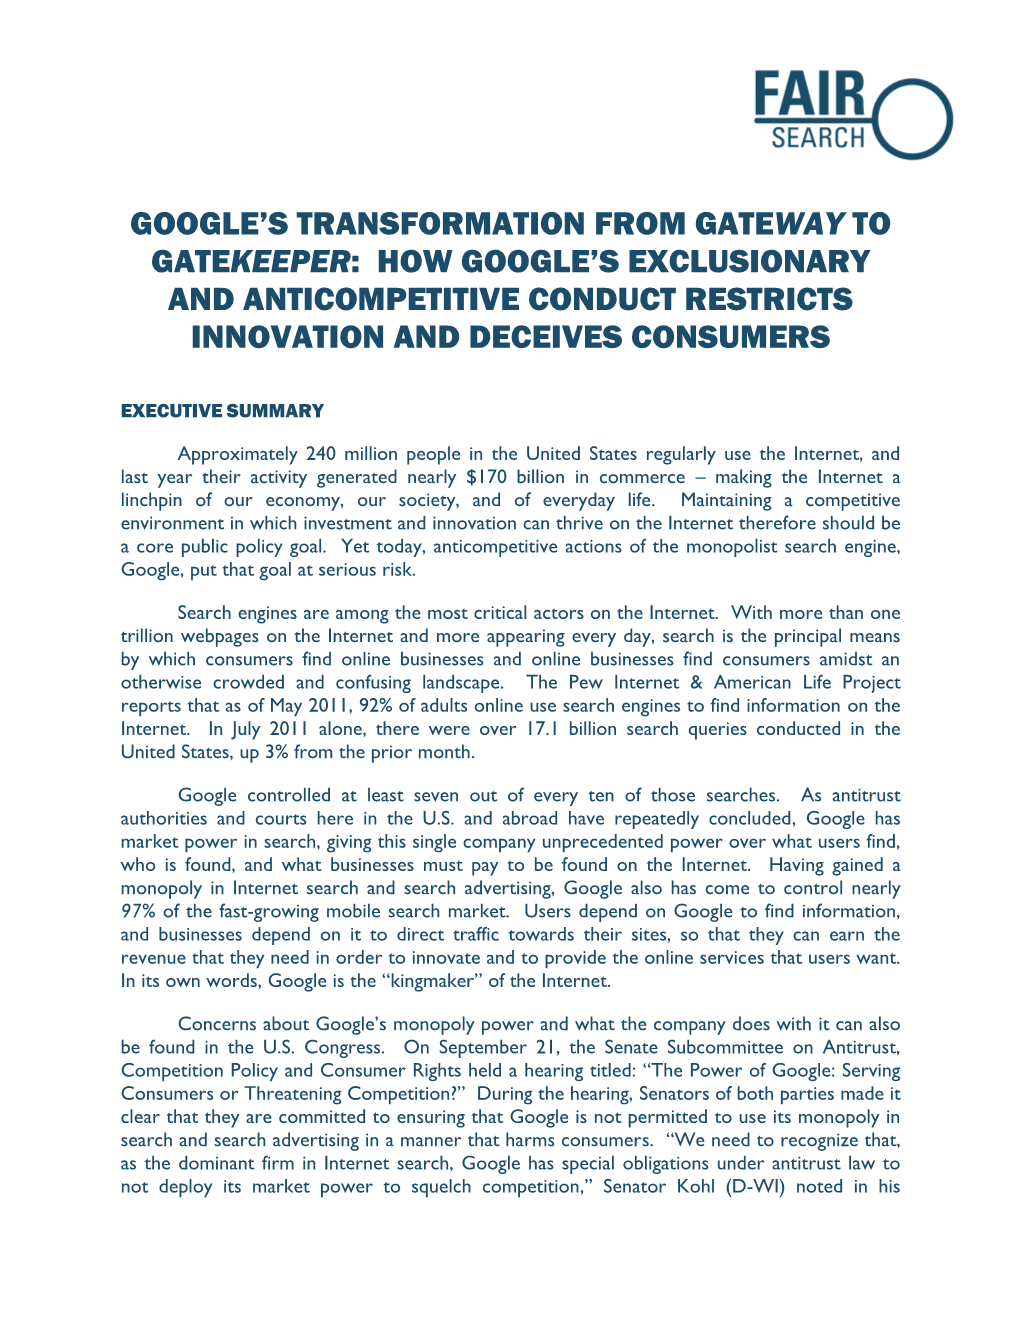 How Google's Exclusionary and Anticompetitive Conduct Restricts